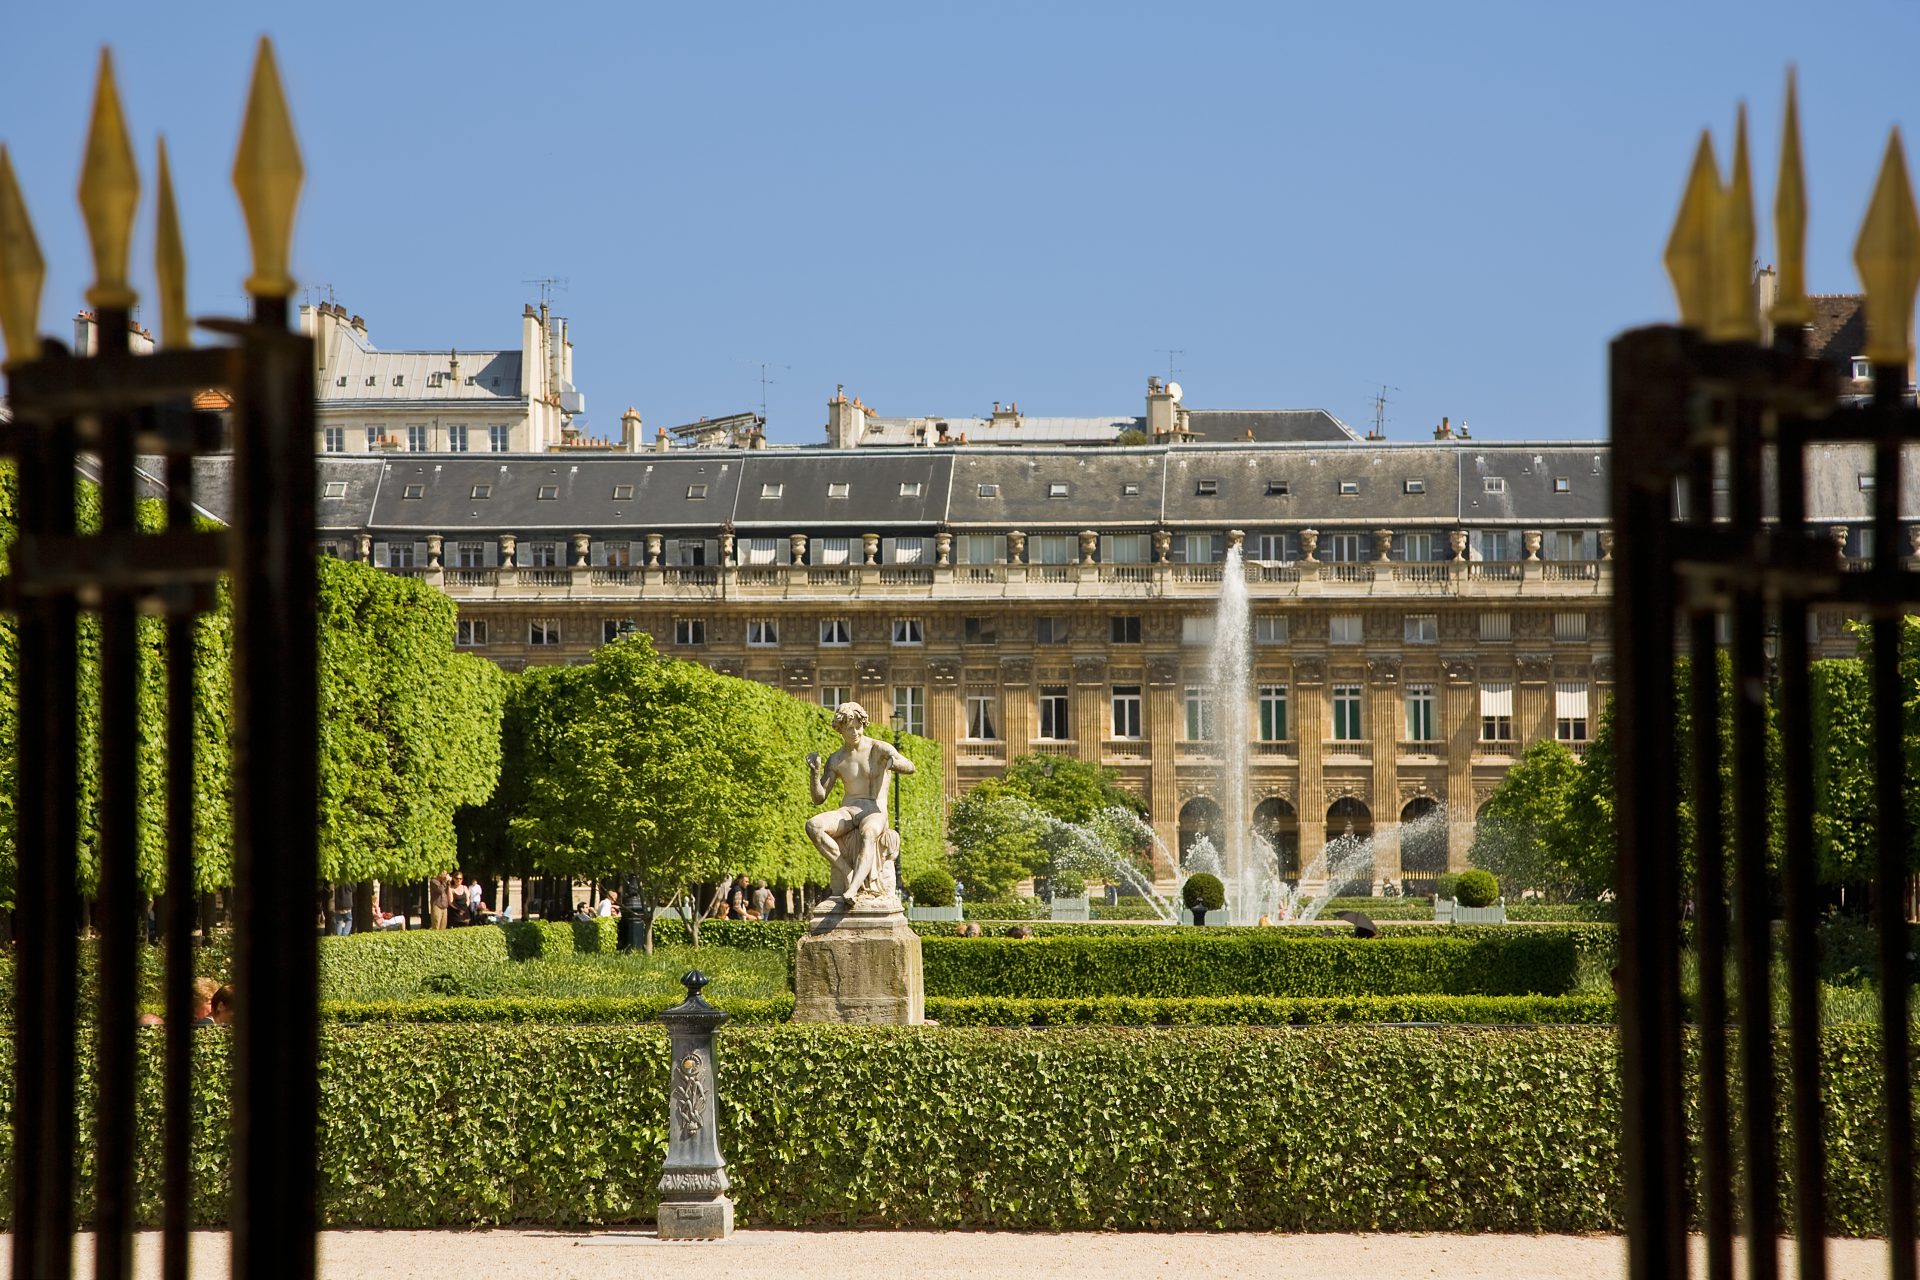 <p>Set up in 1633, this French-style garden is a historically rich site in the heart of Paris. The Jardin du Palais-Royal features flower beds, several fountains, and sculptures, providing a lovely setting for a hand-in-hand walk. Before entering the garden, pause in the Palais Royal's Cour d'Honneur to admire the Buren Columns, a well-known art piece in the capital.</p>